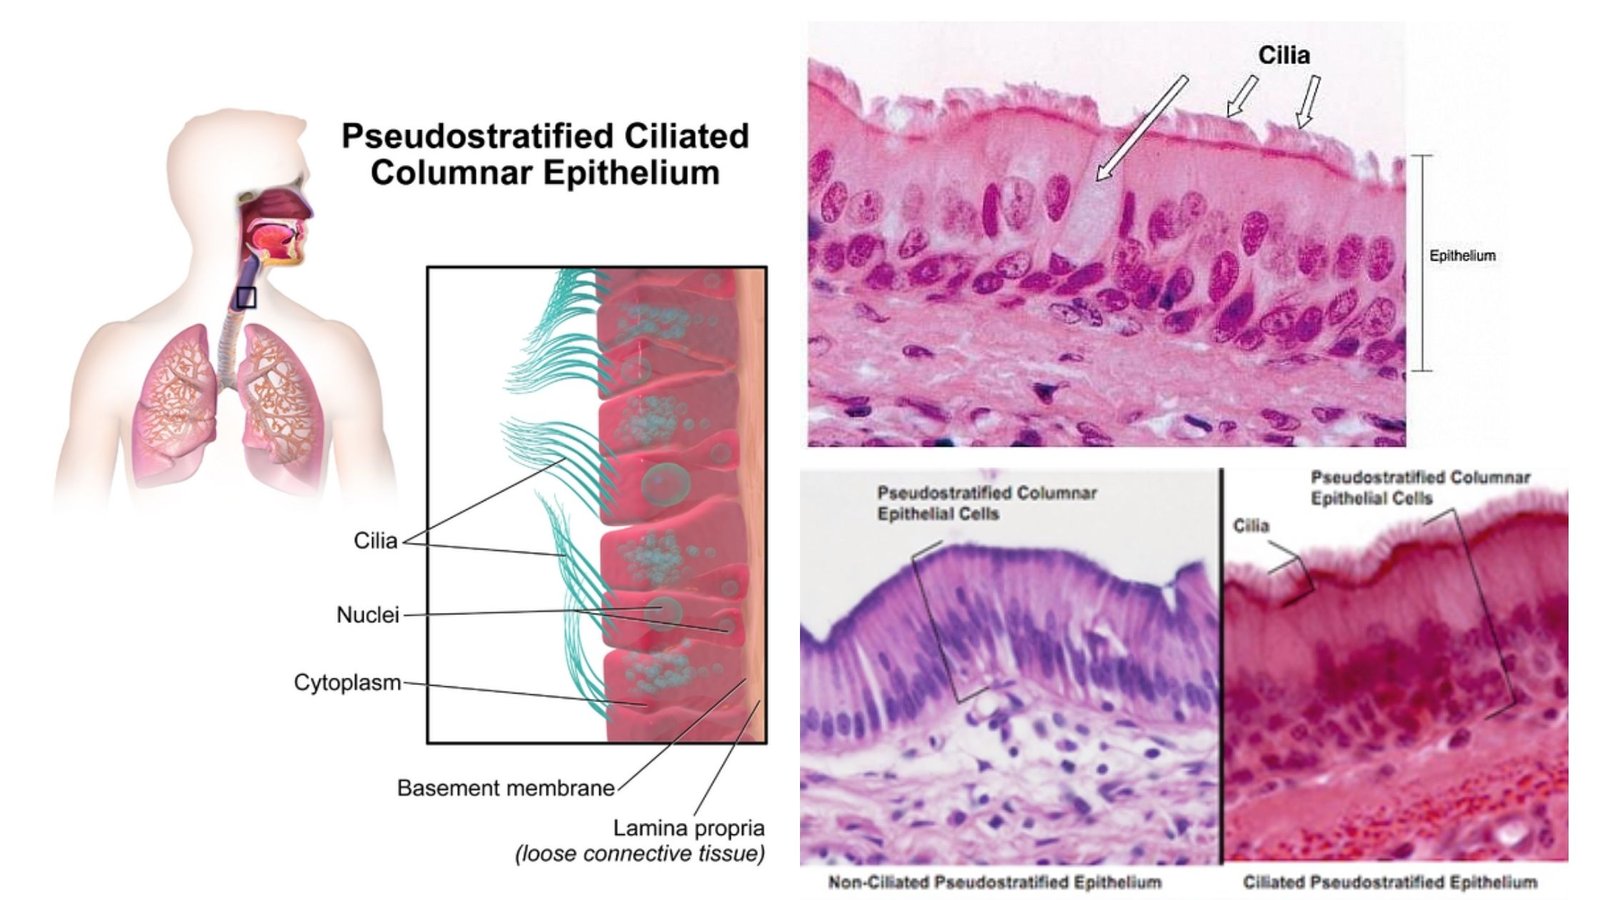 Pseudostratified Columnar Epithelium - Definition, Structure, Function, Types